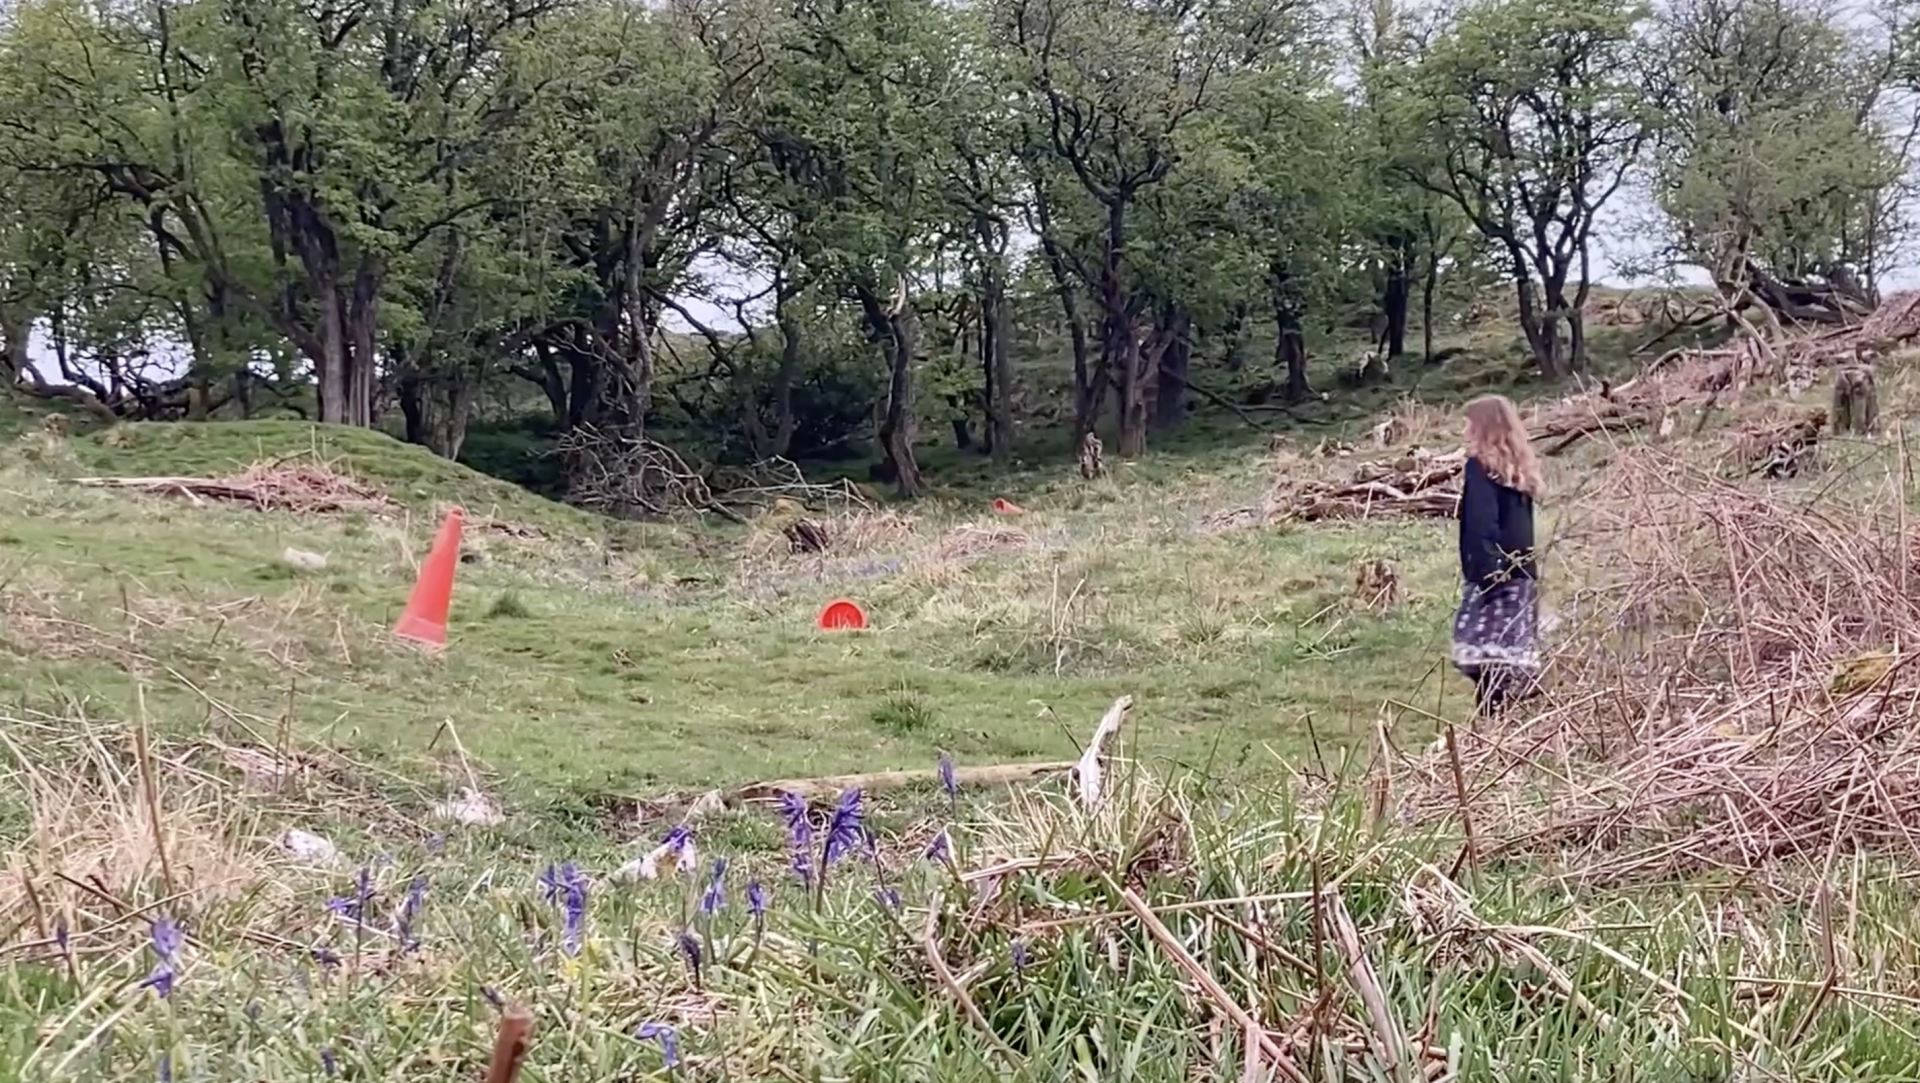 A video still of a person in a field looking at orange traffic cones.